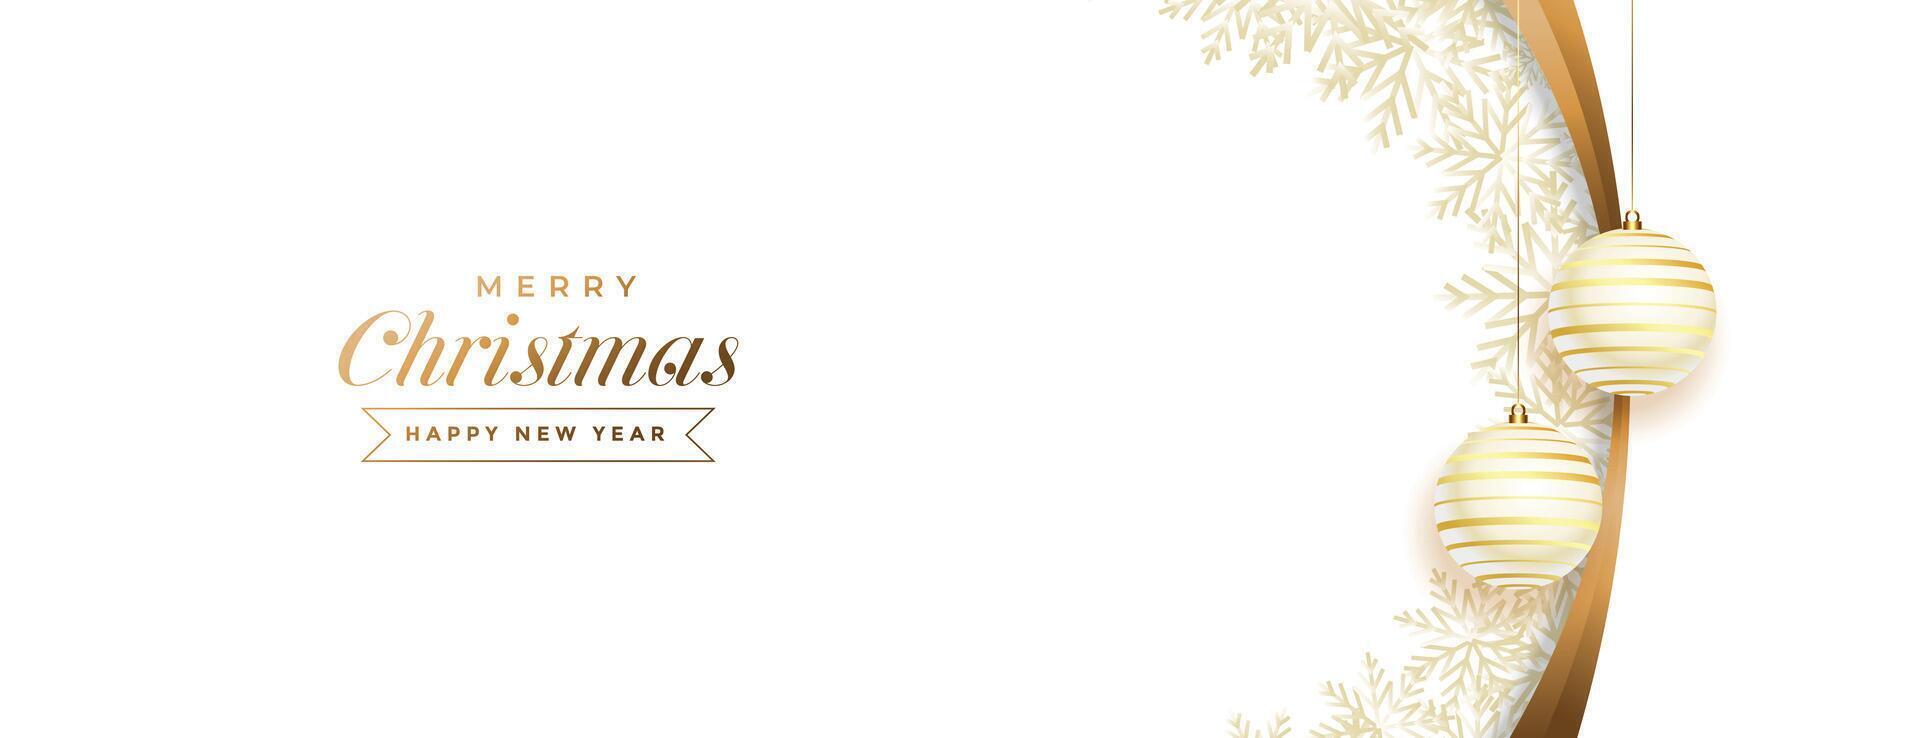 white and golden merry christmas banner with ball decoration vector